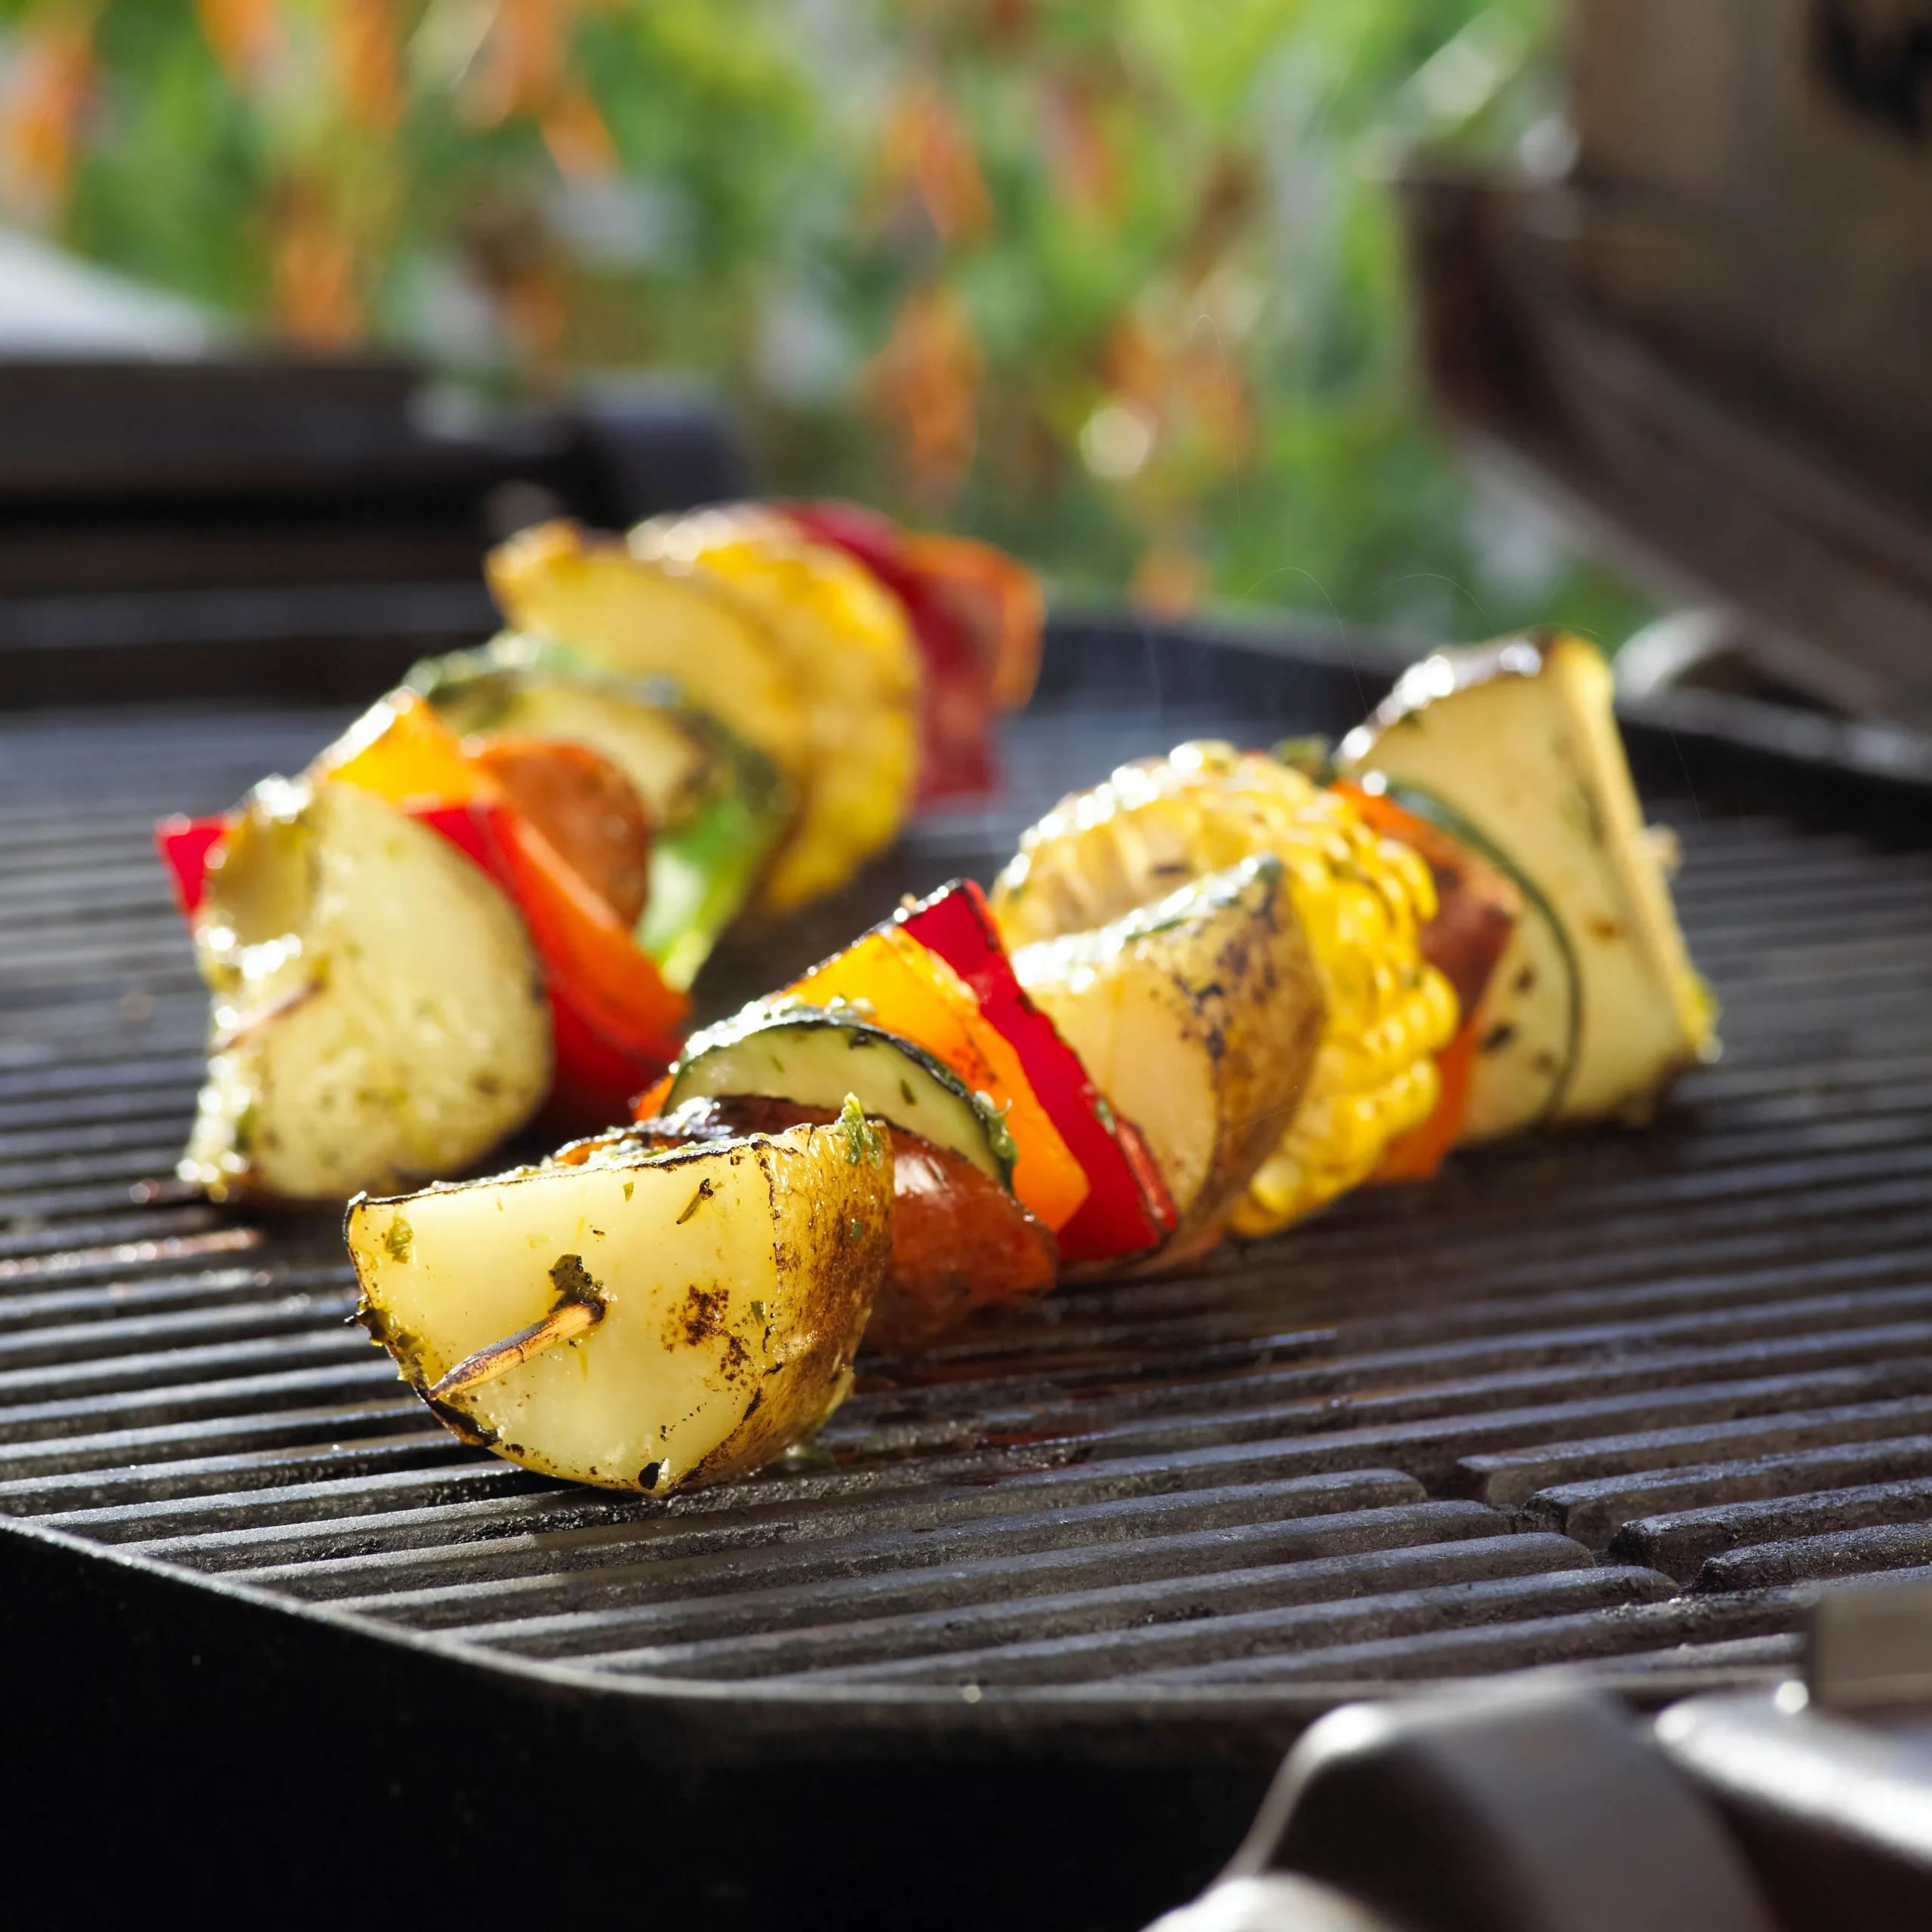 Grilled Potato Kabobs with Lemon Herb Drizzle